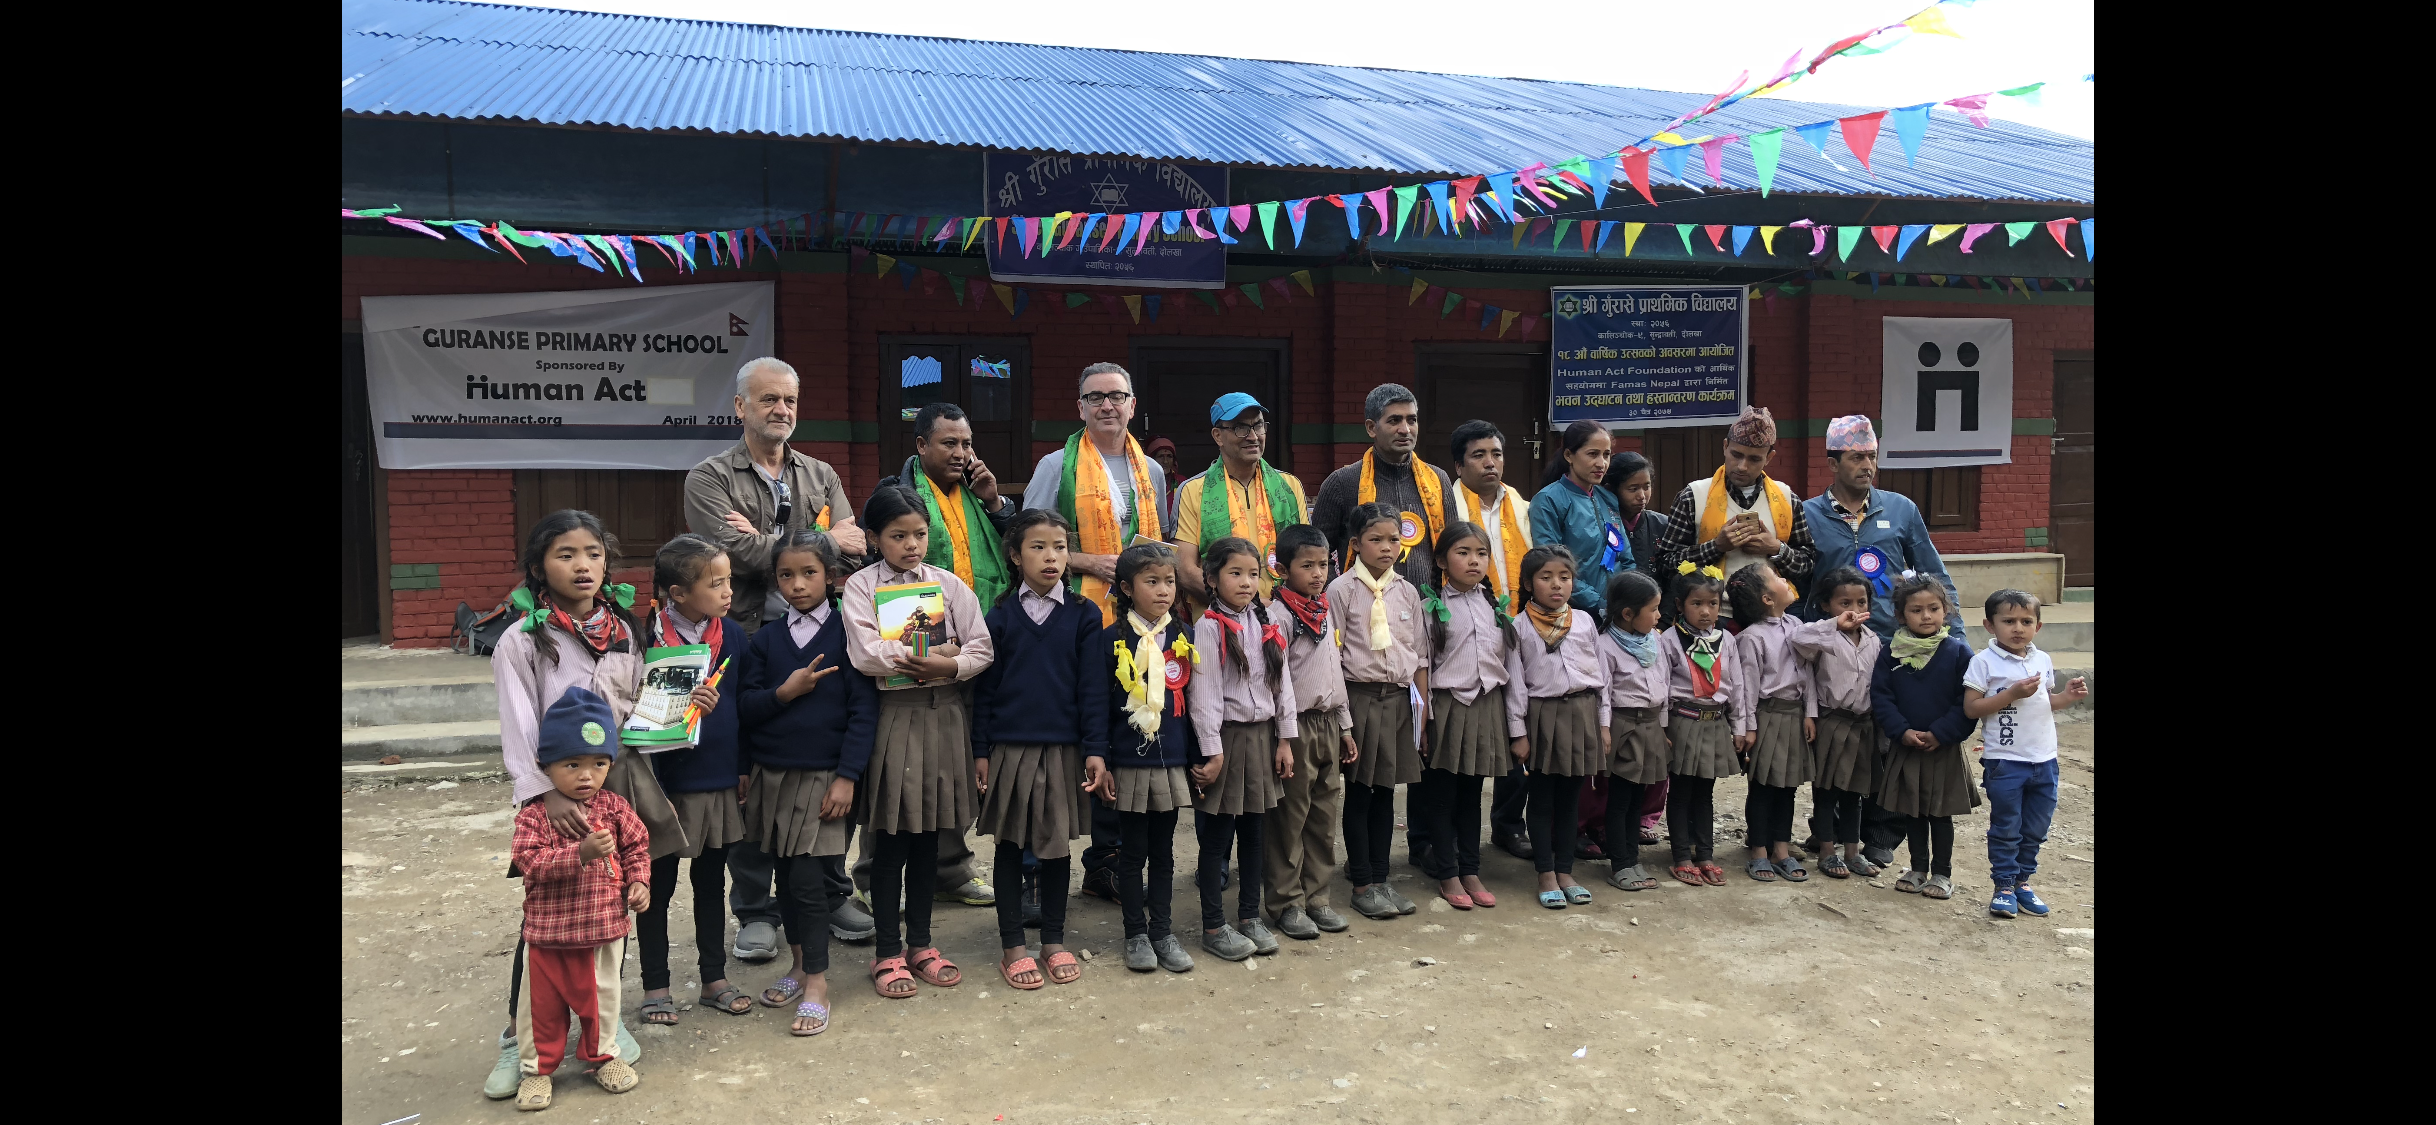 Djaffar the founder of Human Act, visiting one of the schools established in Nepal 